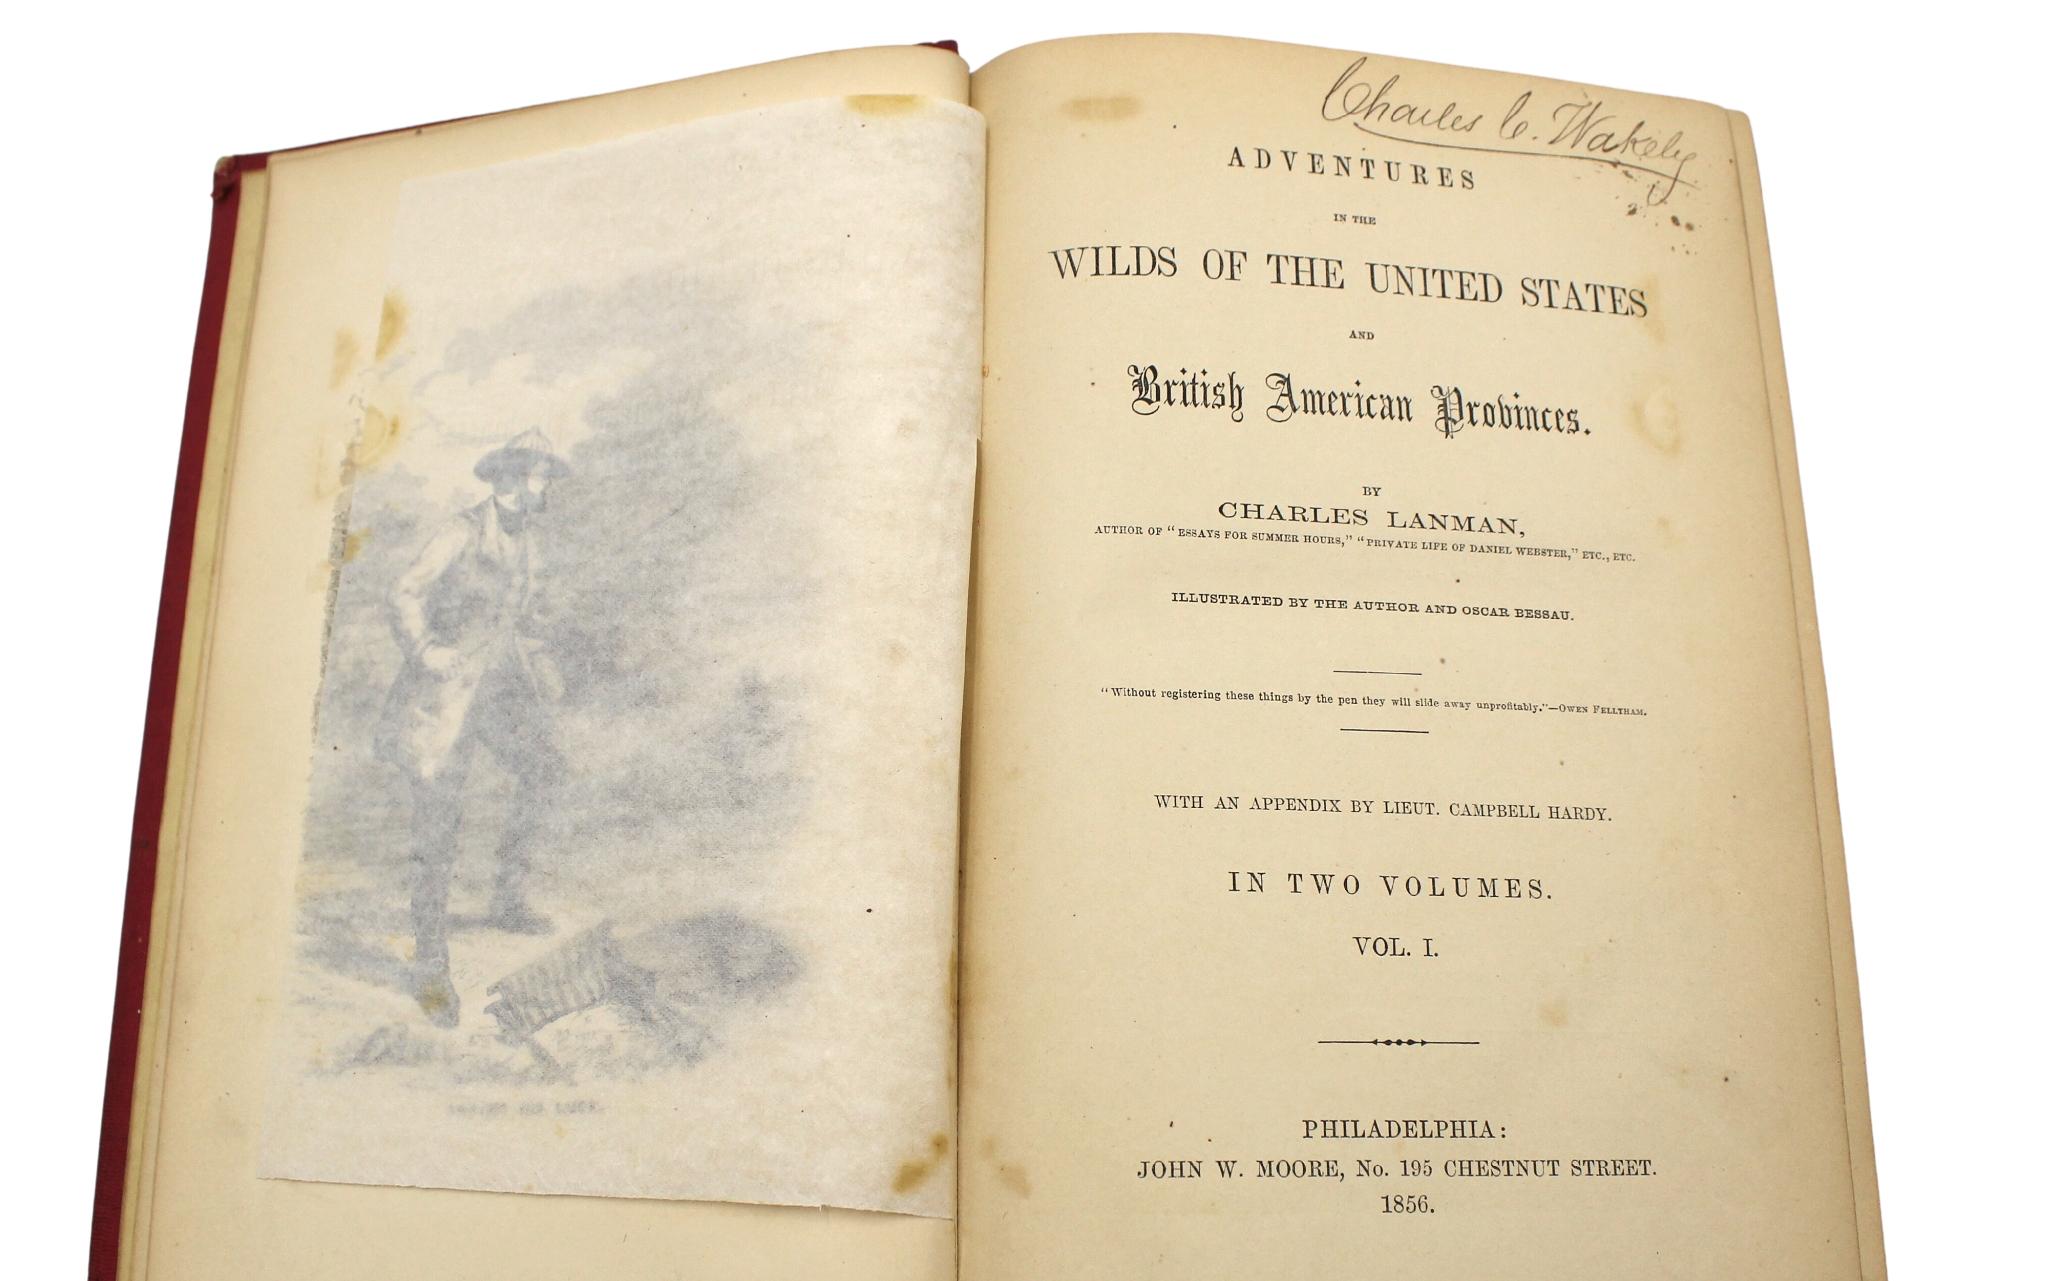 Mid-19th Century Adventures in the Wilds of the United States, by Charles Lanman, 1856